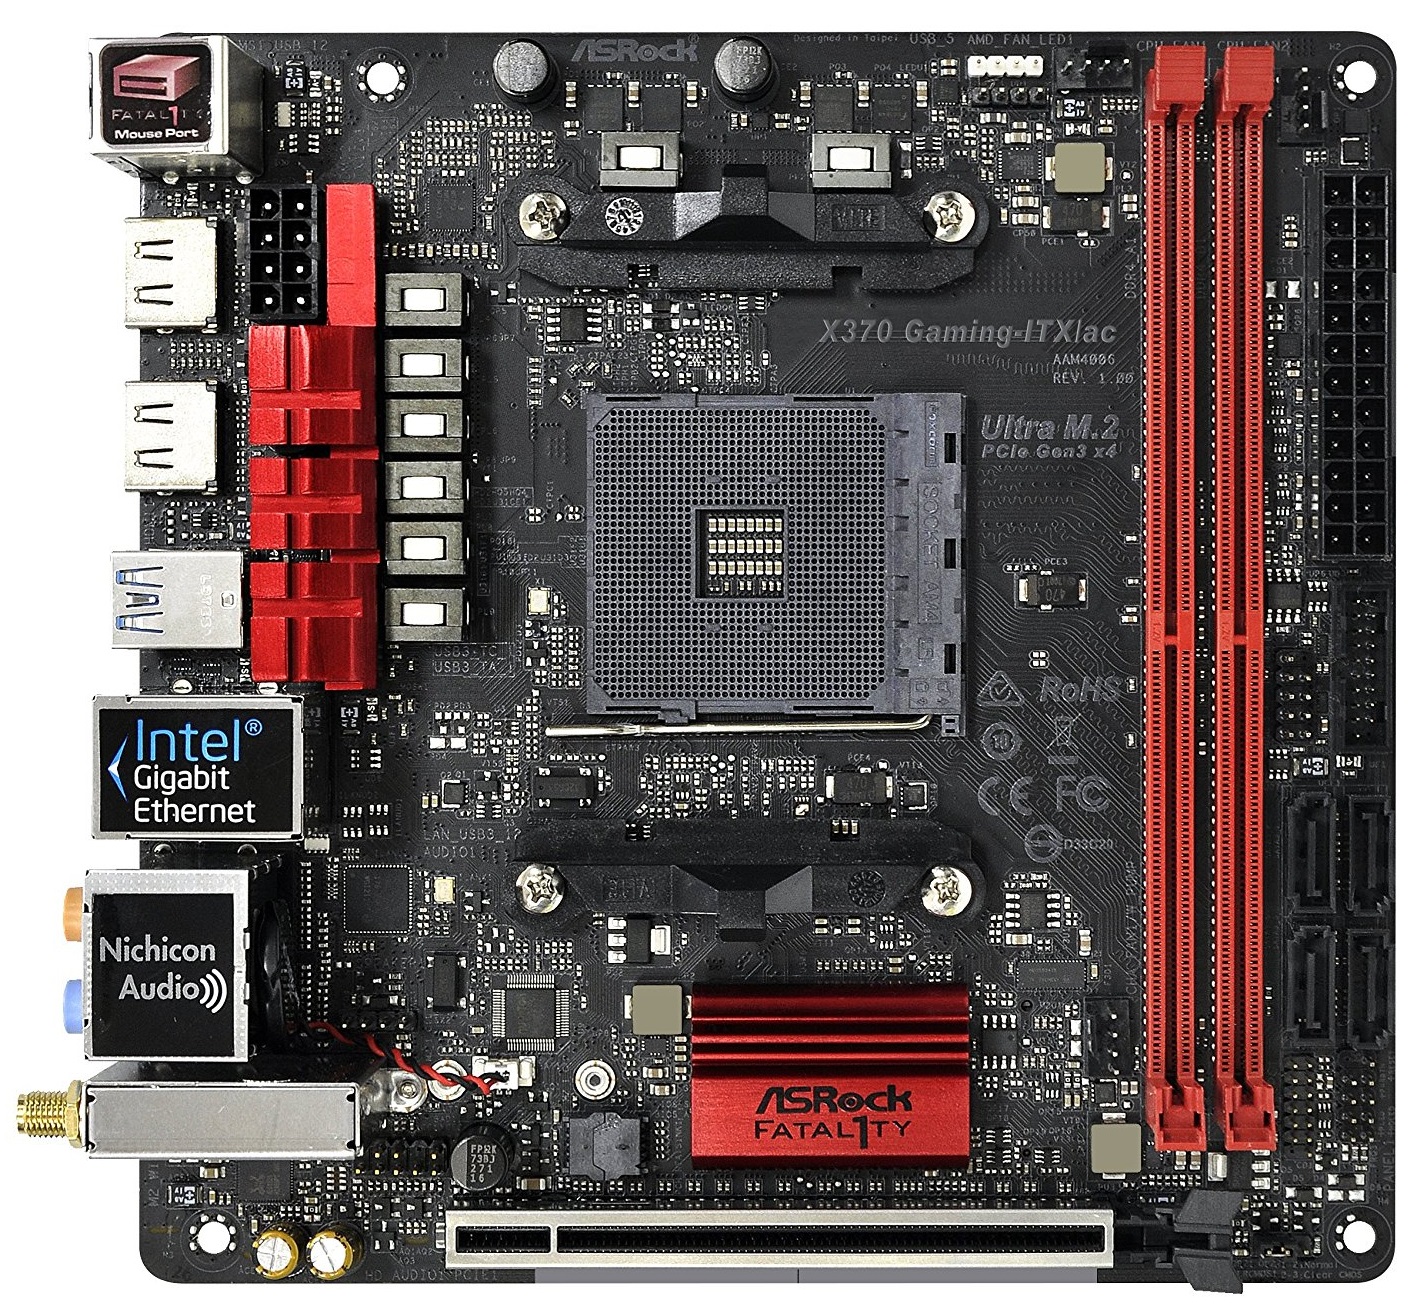 The Asrock X370 Gaming Itx Ac Motherboard Review